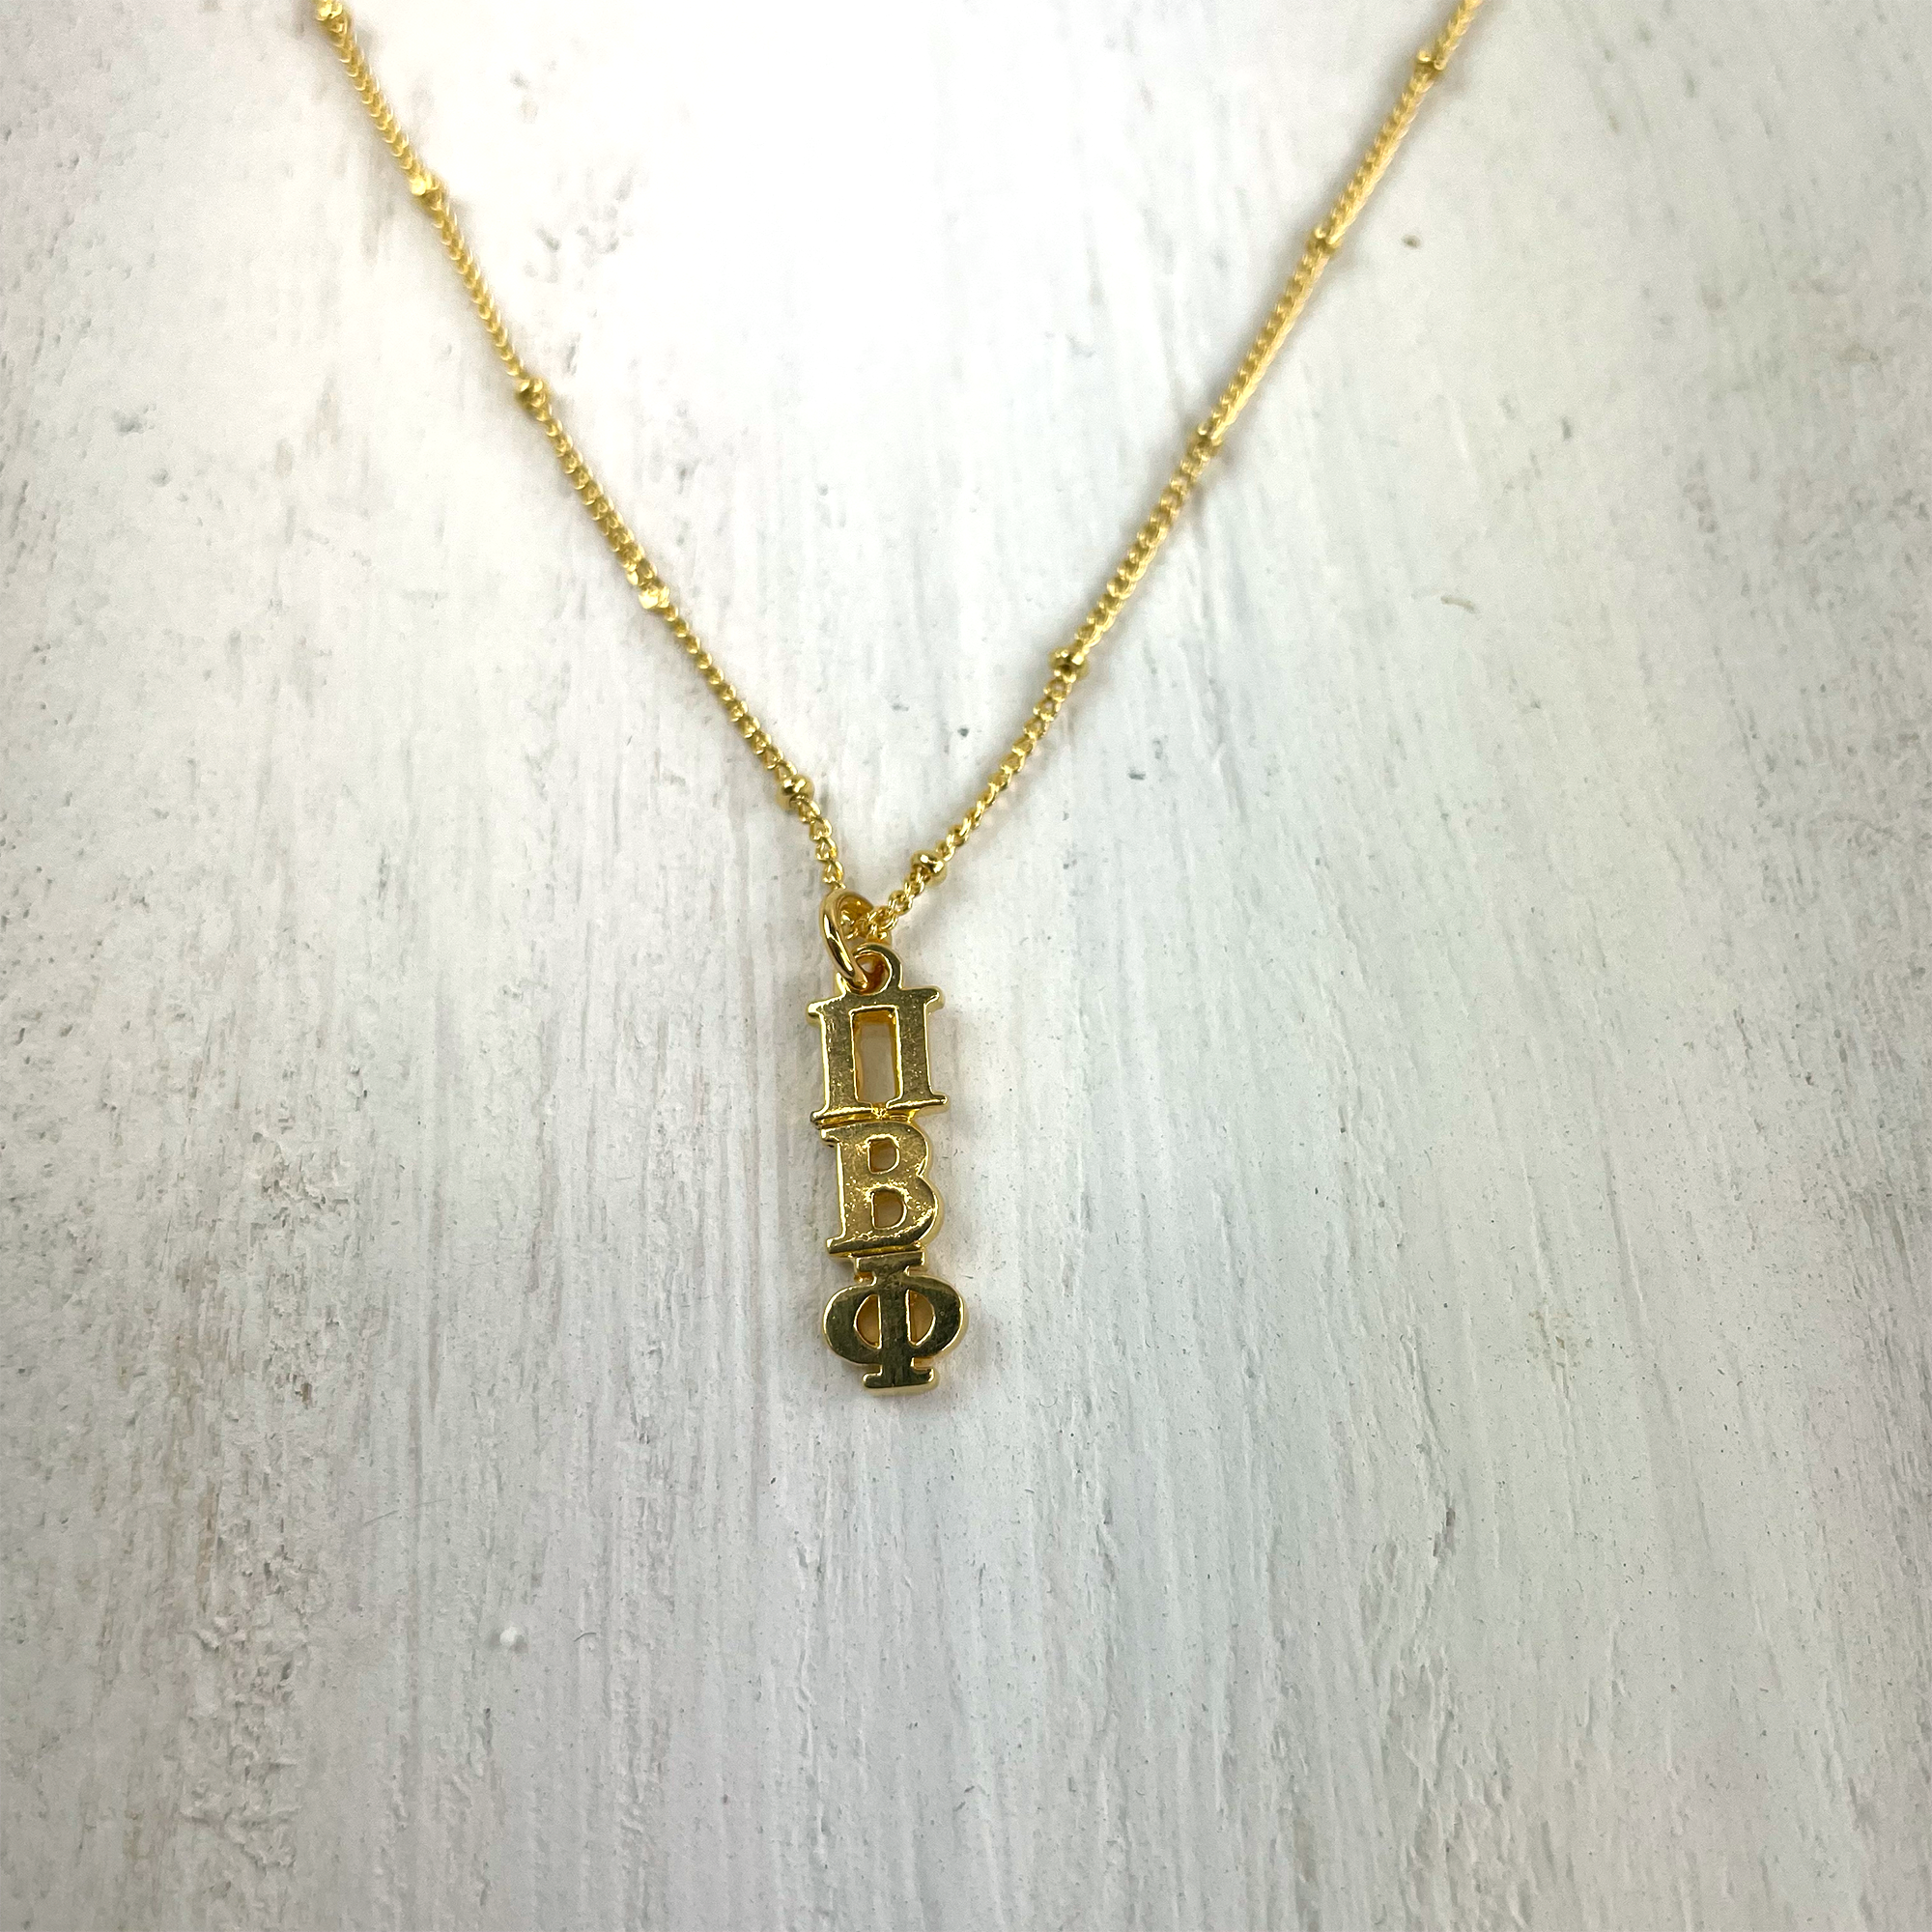 Pi Beta Phi Lavaliere Gold Necklace - Go Greek Chic